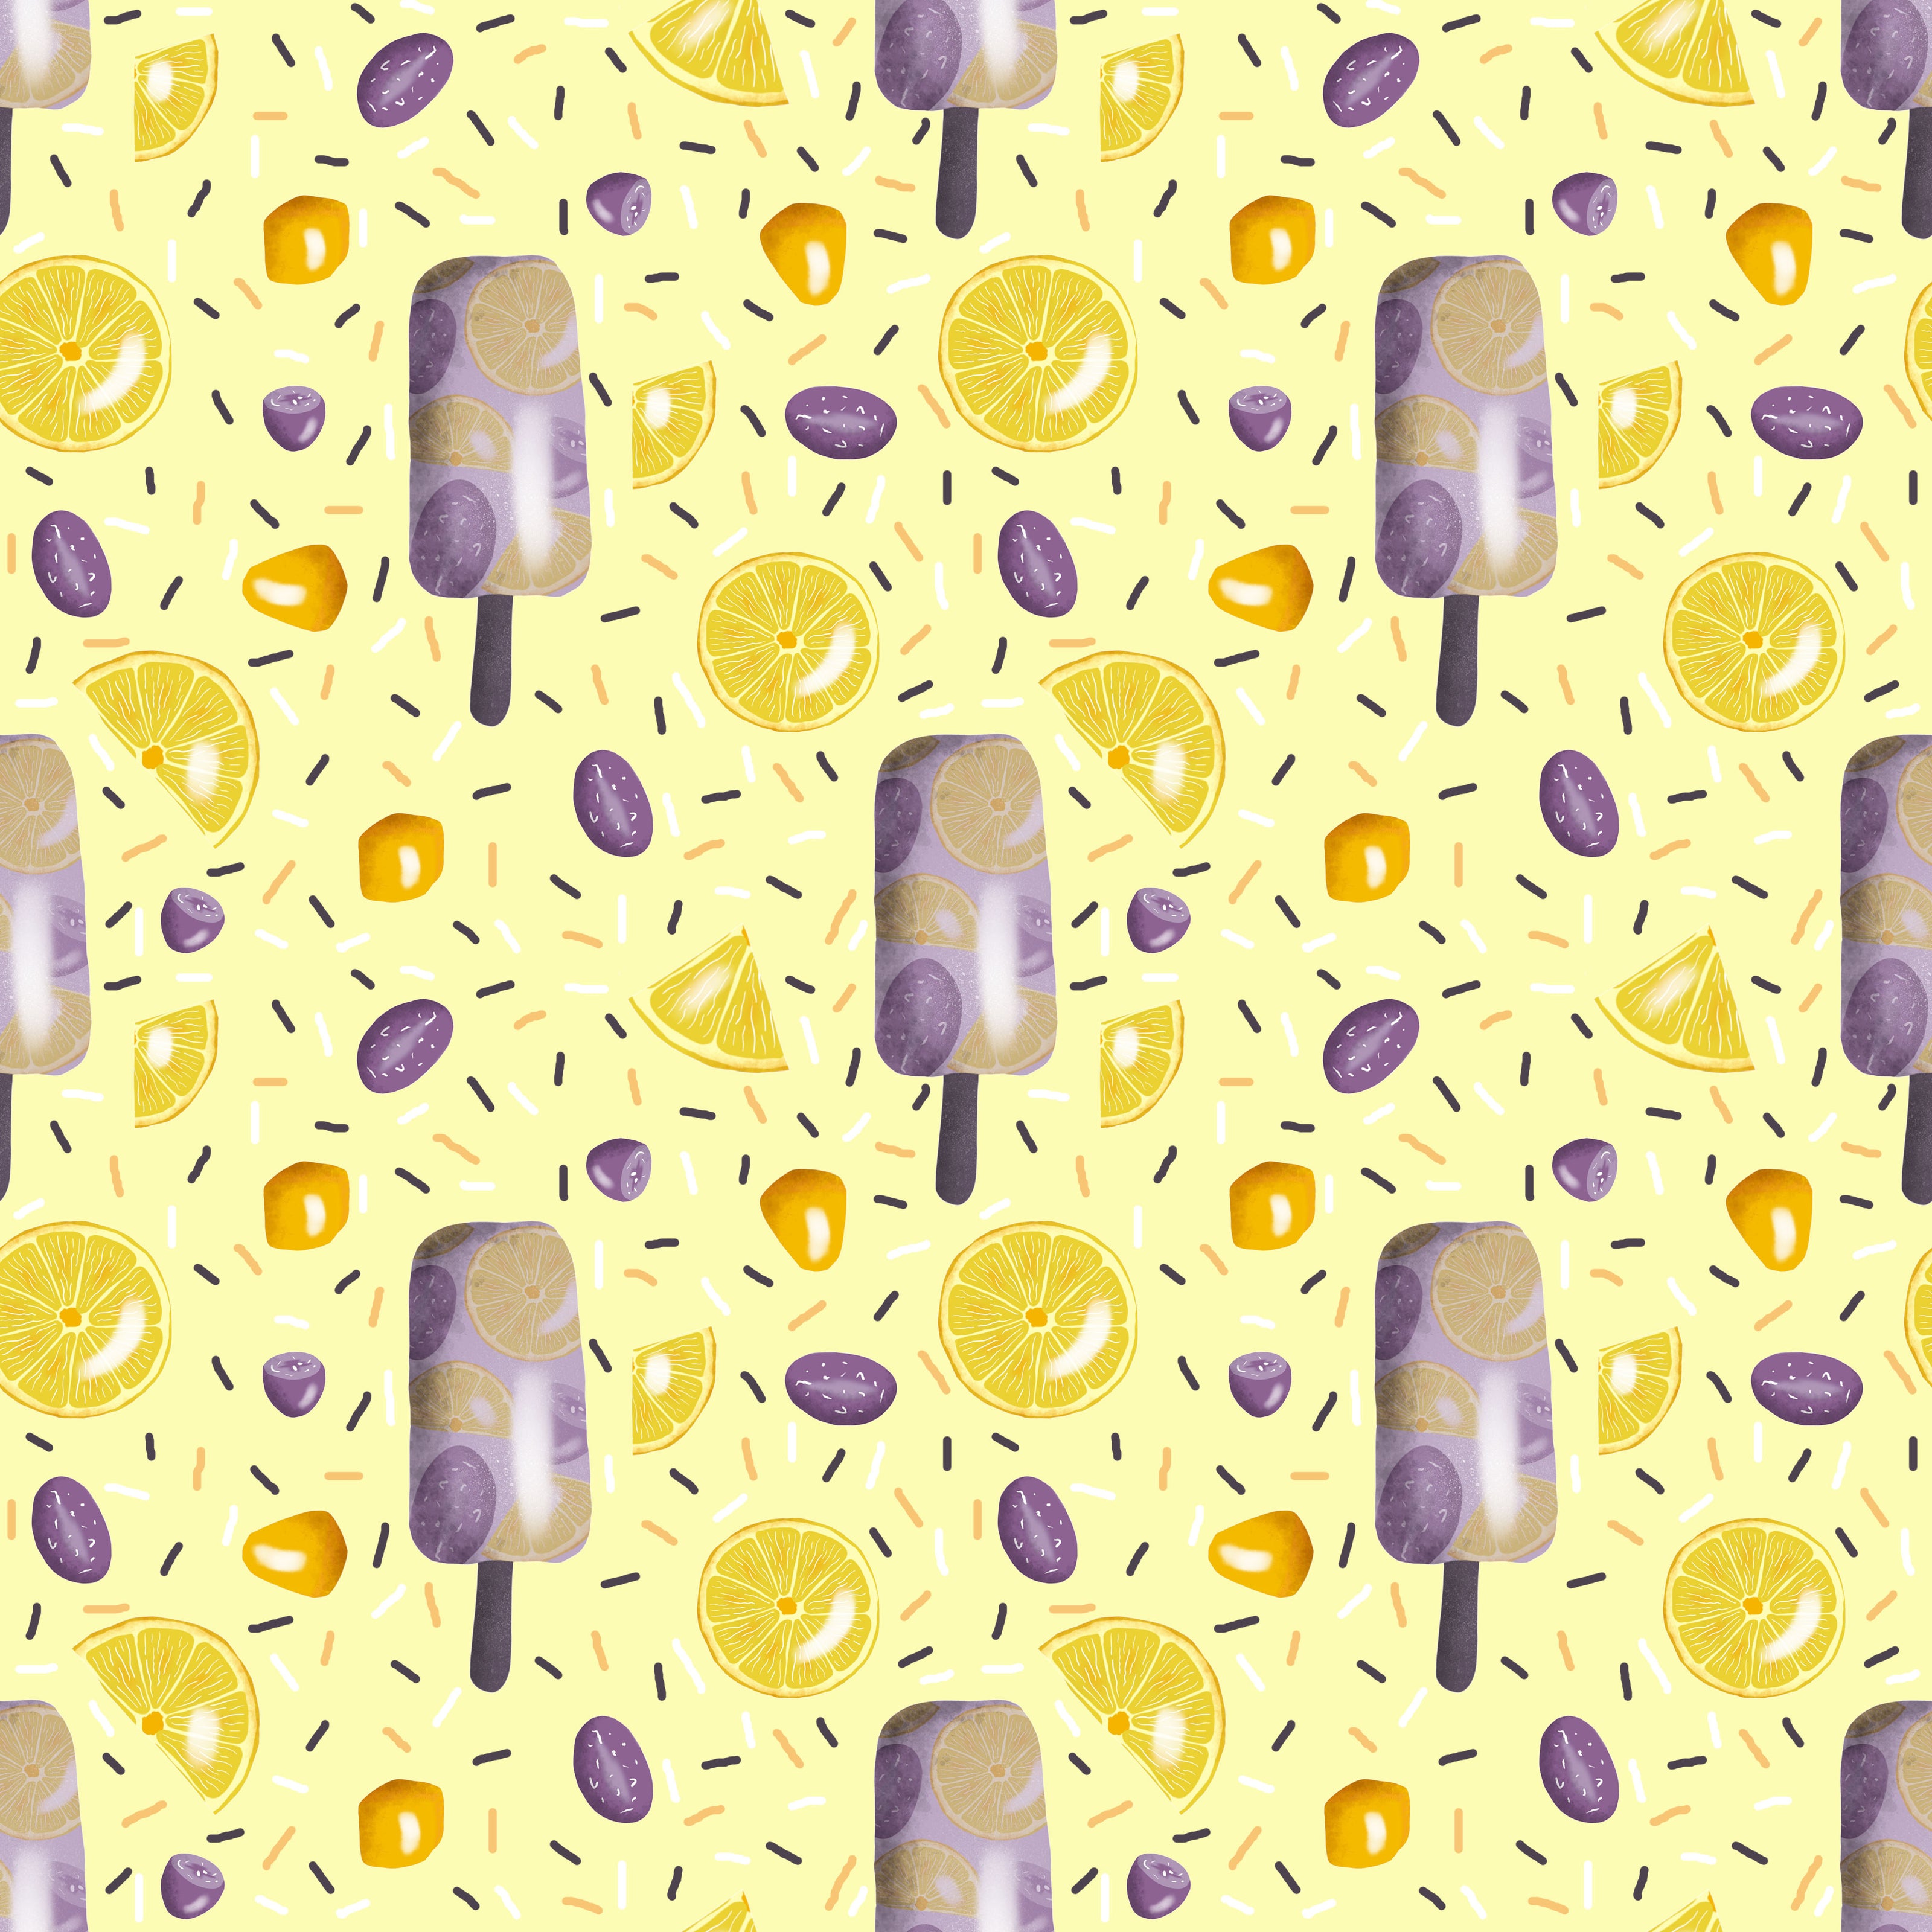 yellow and purple ice lolly surface pattern design